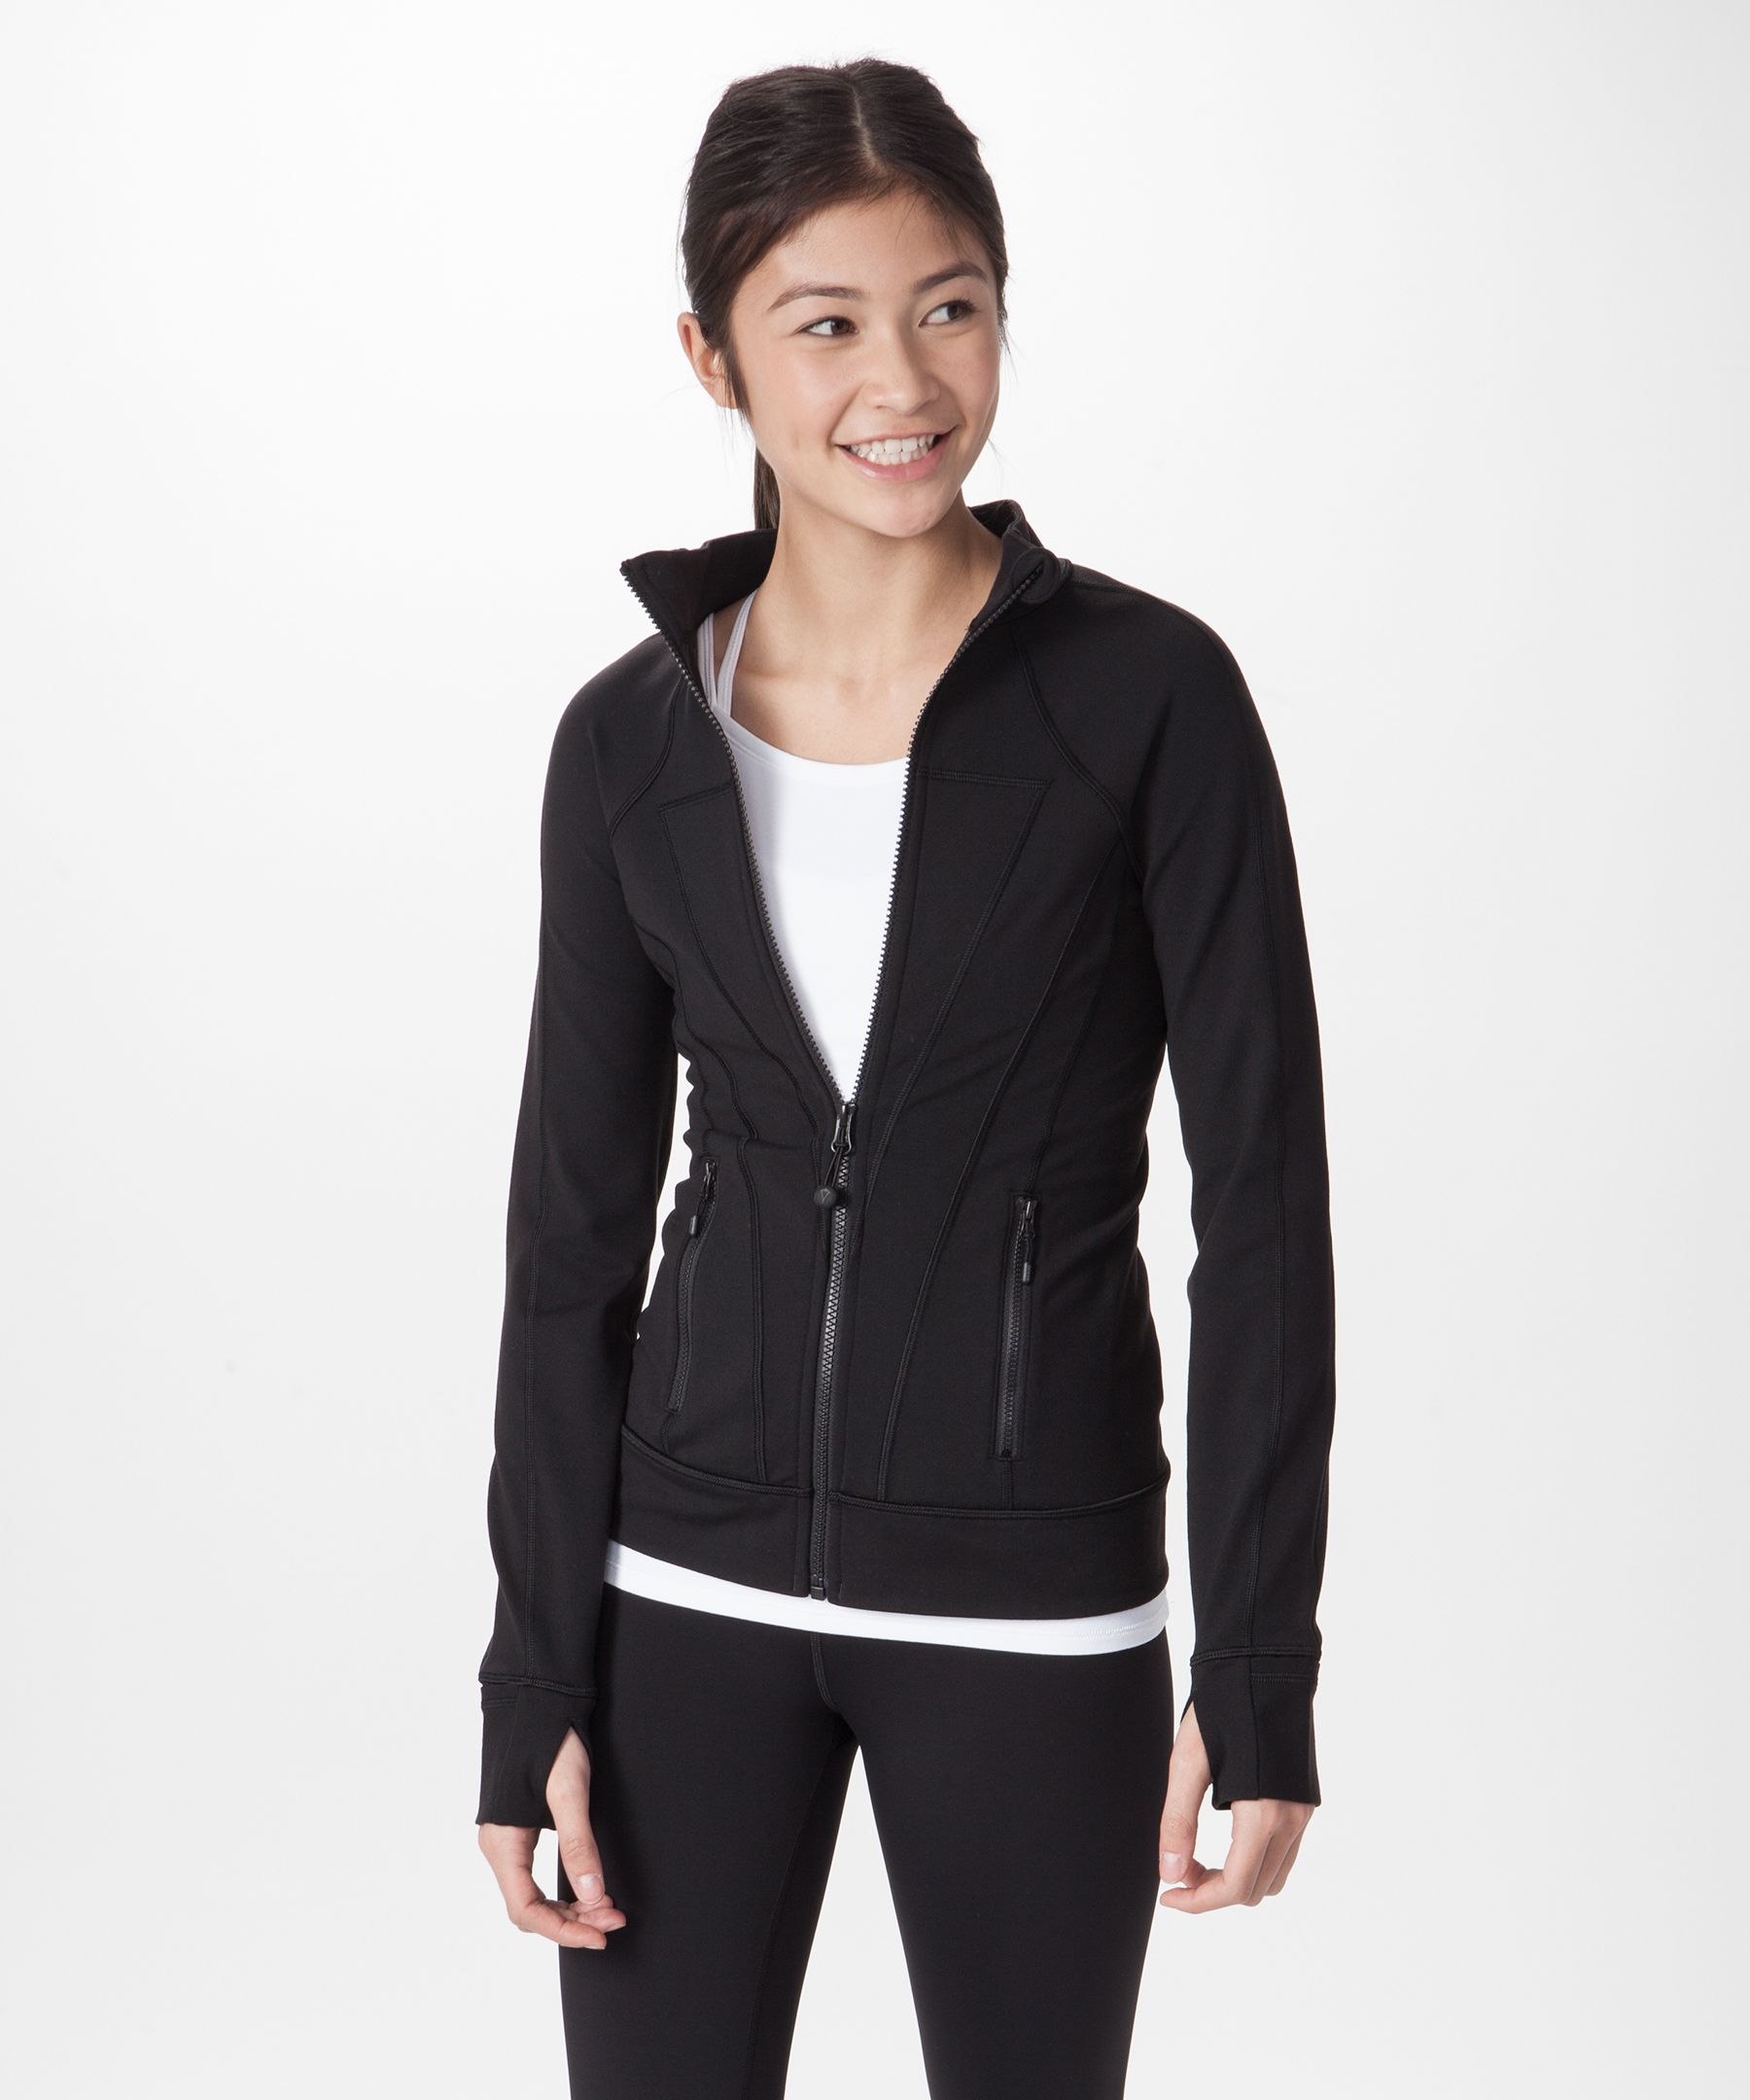 ivivva jackets for sale